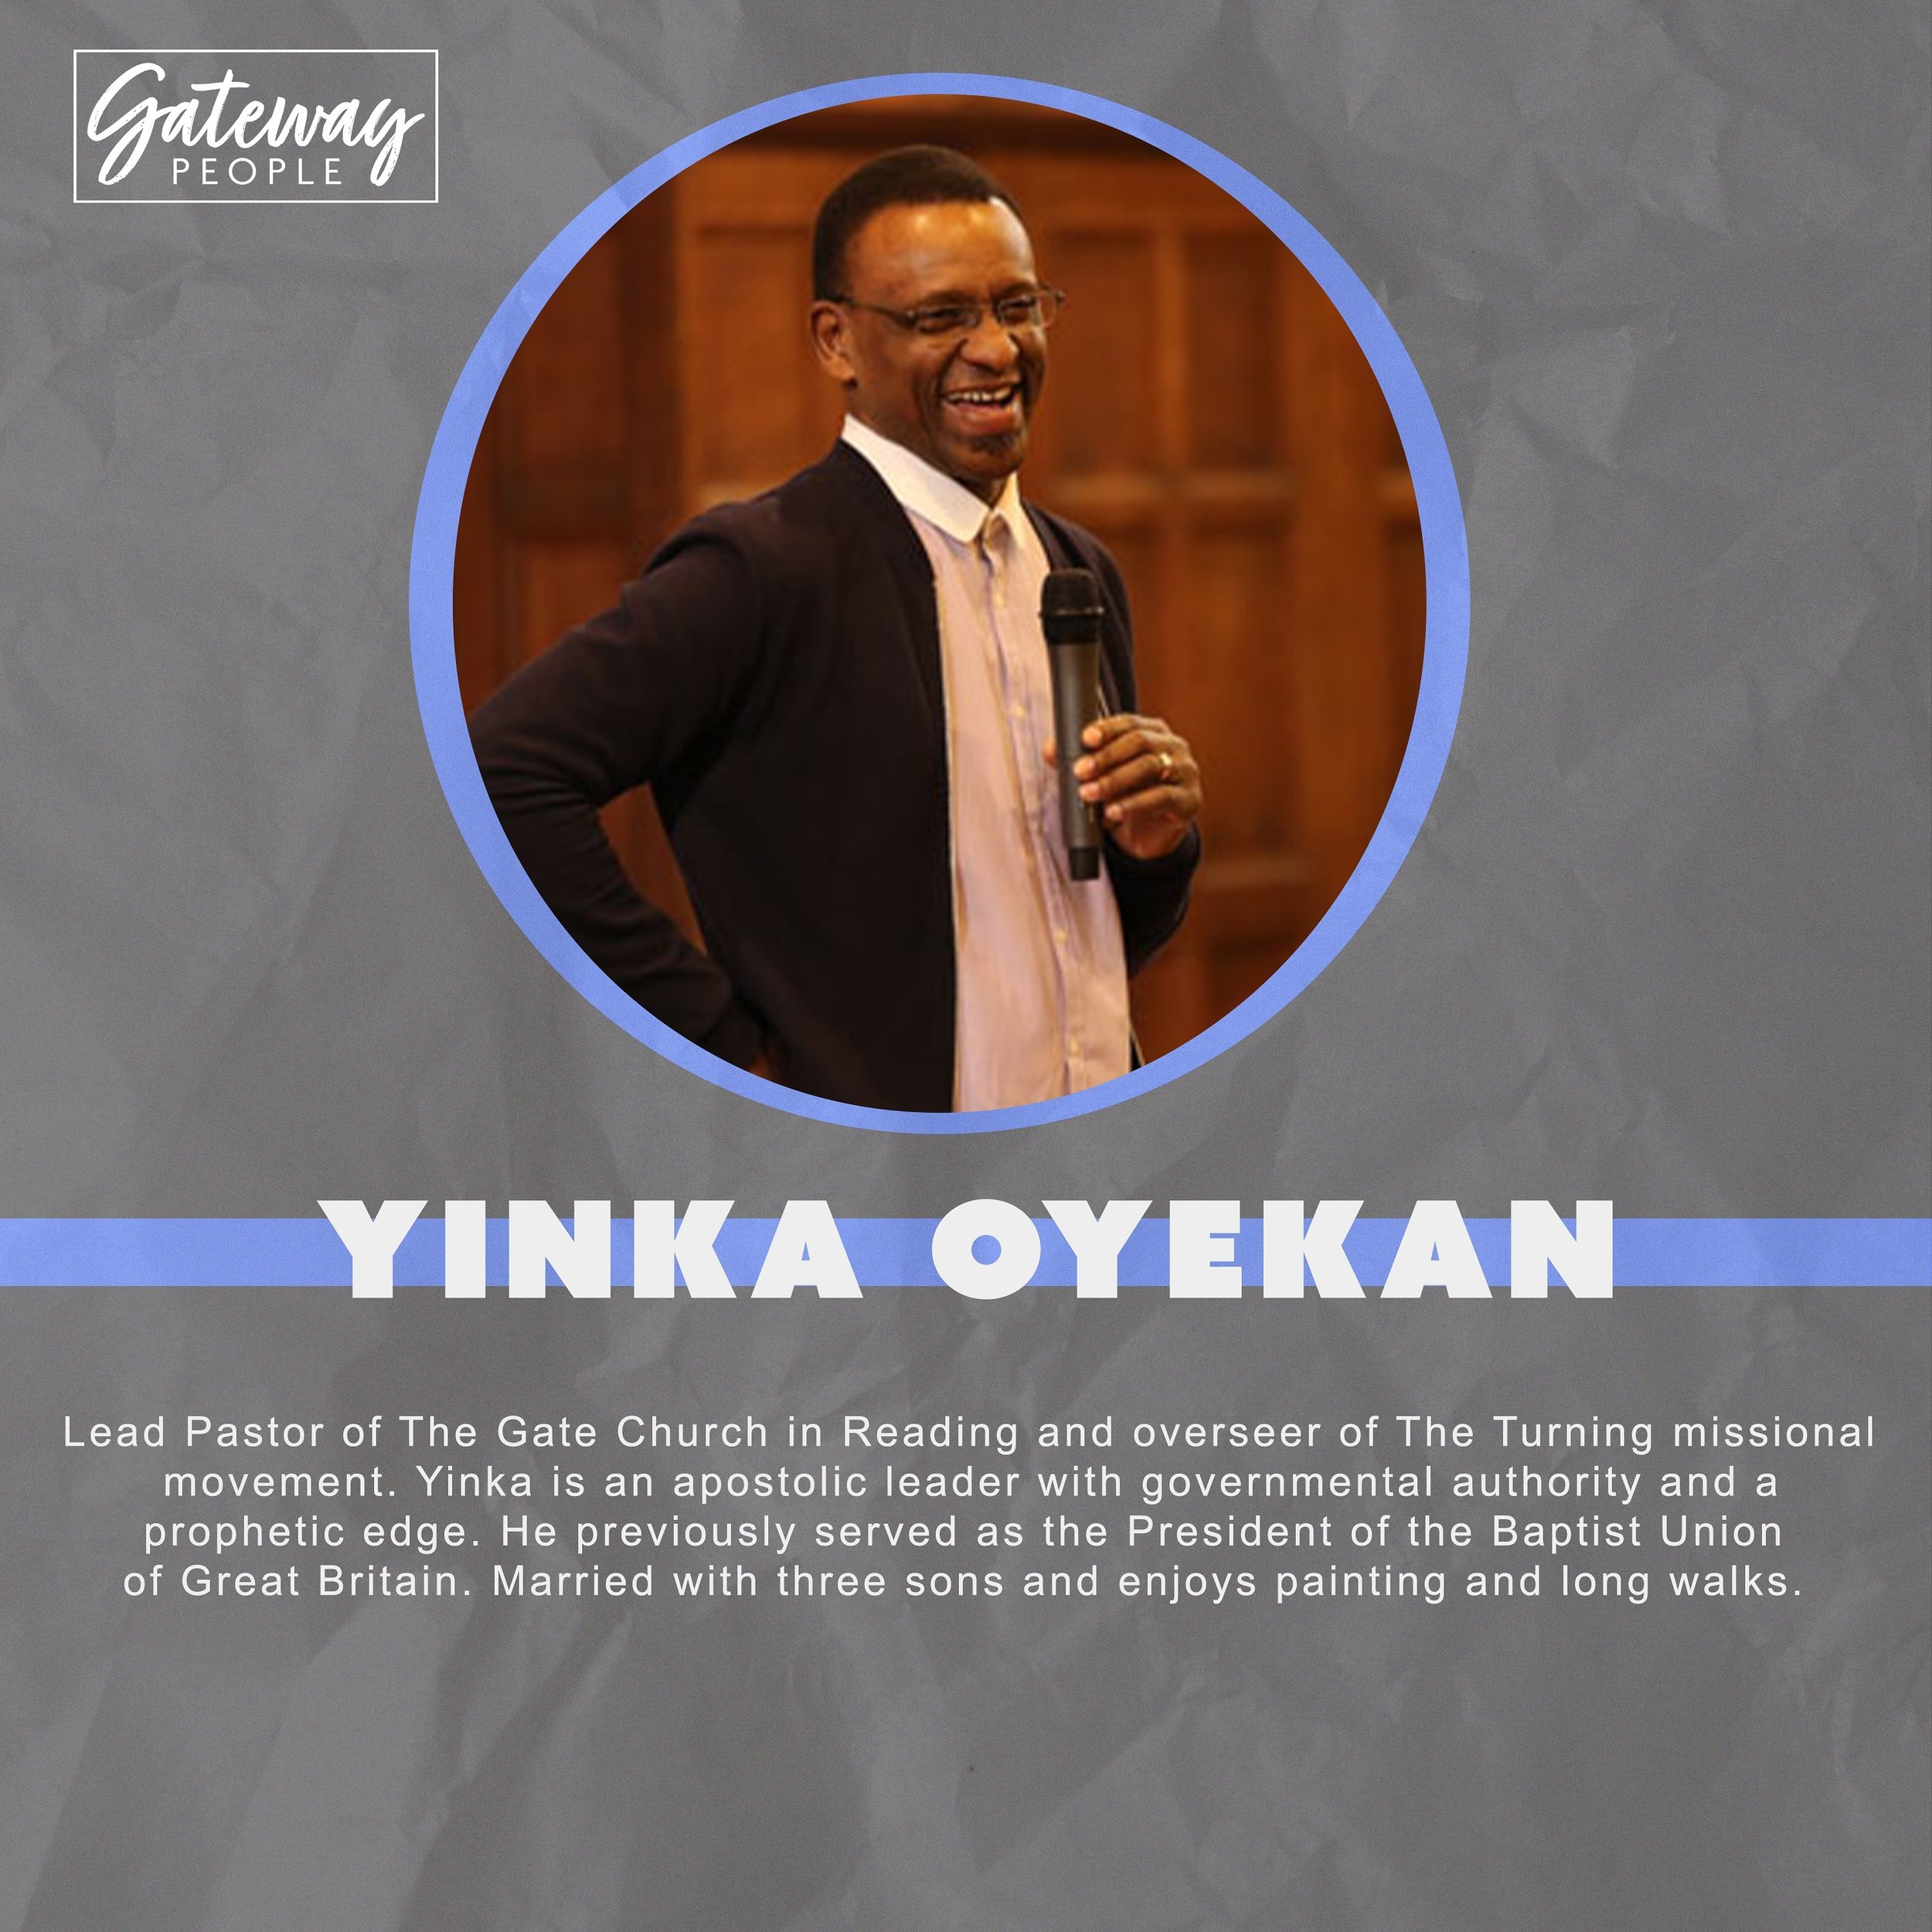 Our next speaker for gateway is Yinka Oyekan!! 🙏🏼

💻 Graphic by @taliaharman.thecreative 

#gateway #2024 #conference #more #gateway2024 #citylifechurch #gatewaypeople #portsmouth #church #jesusisking #churchconference #wewantmore